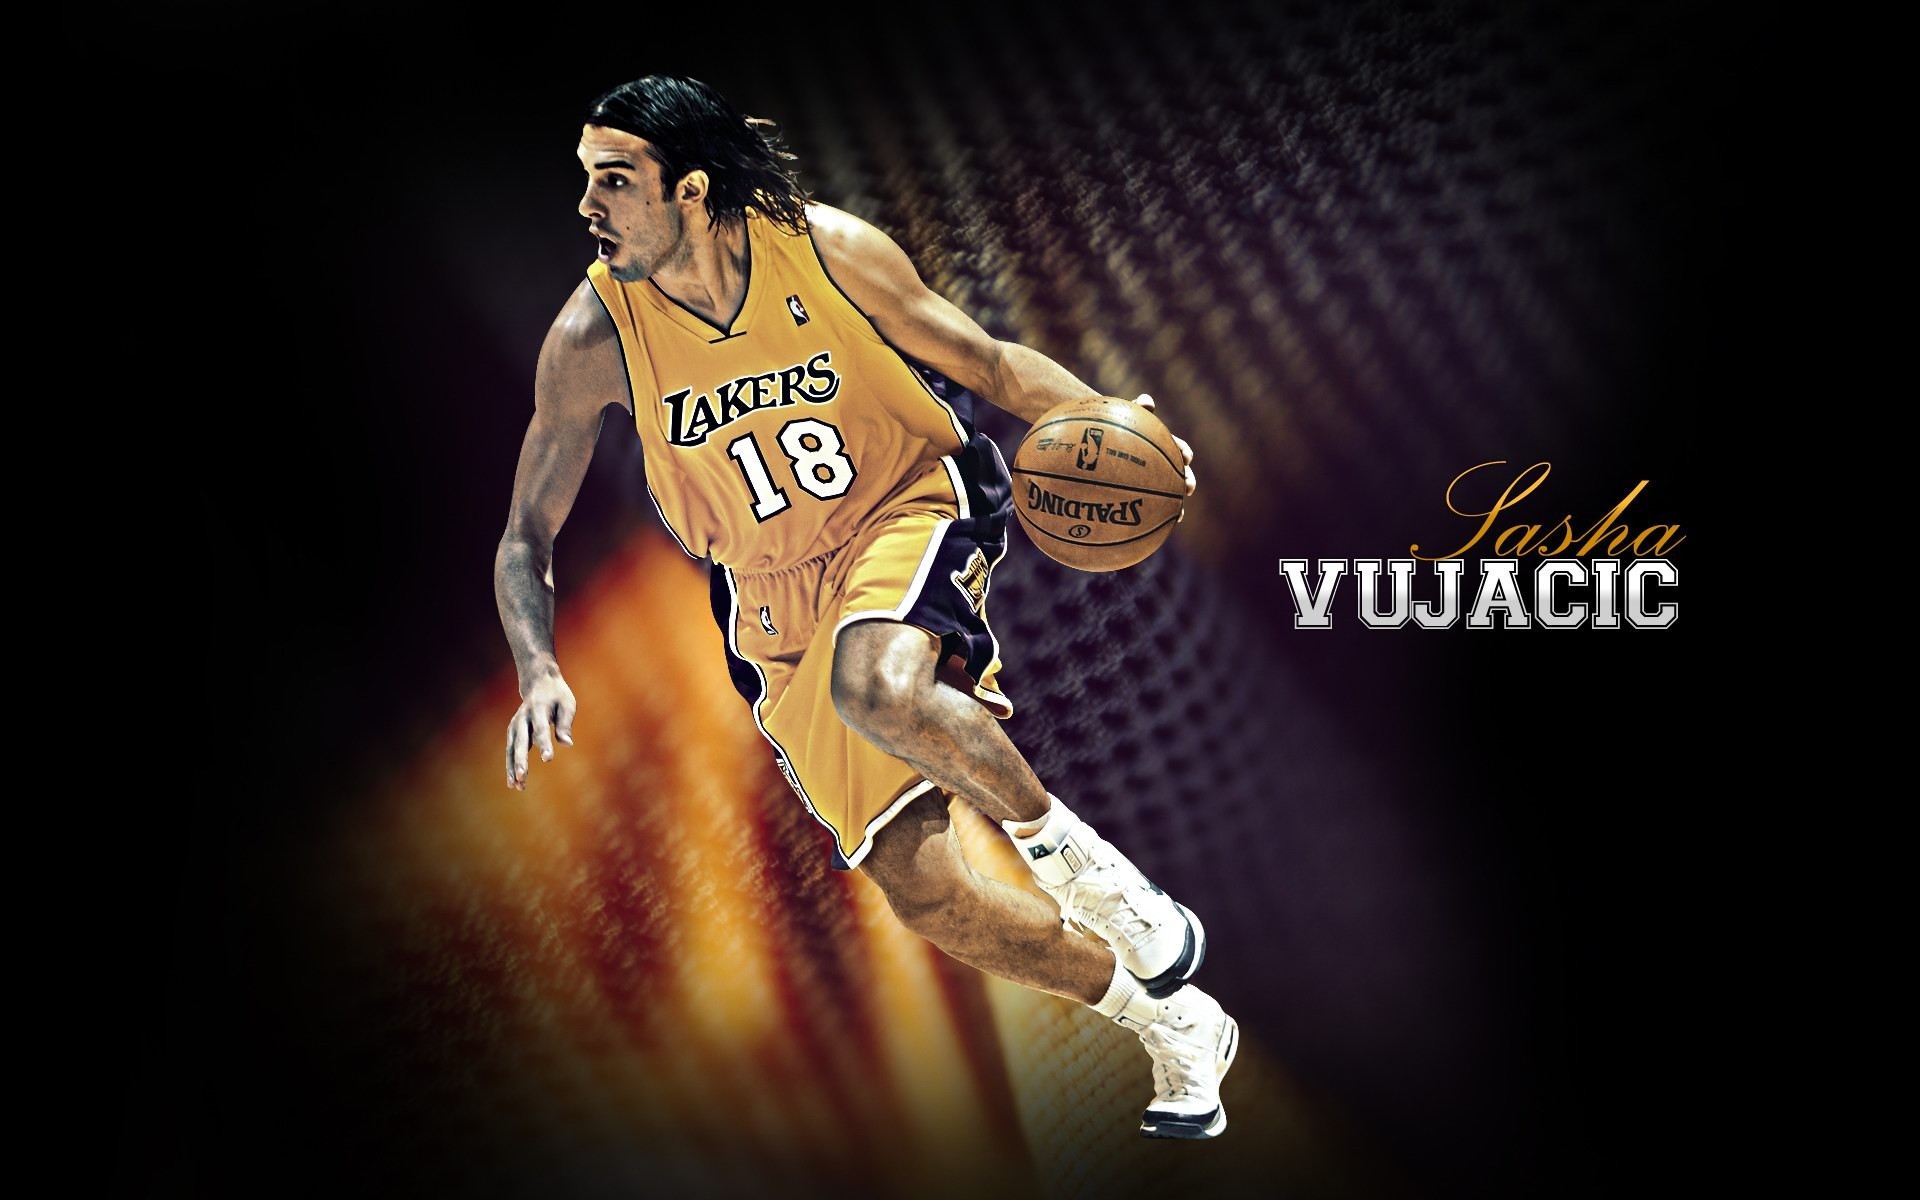 Los Angeles Lakers Wallpaper Oficial #22 - 1920x1200